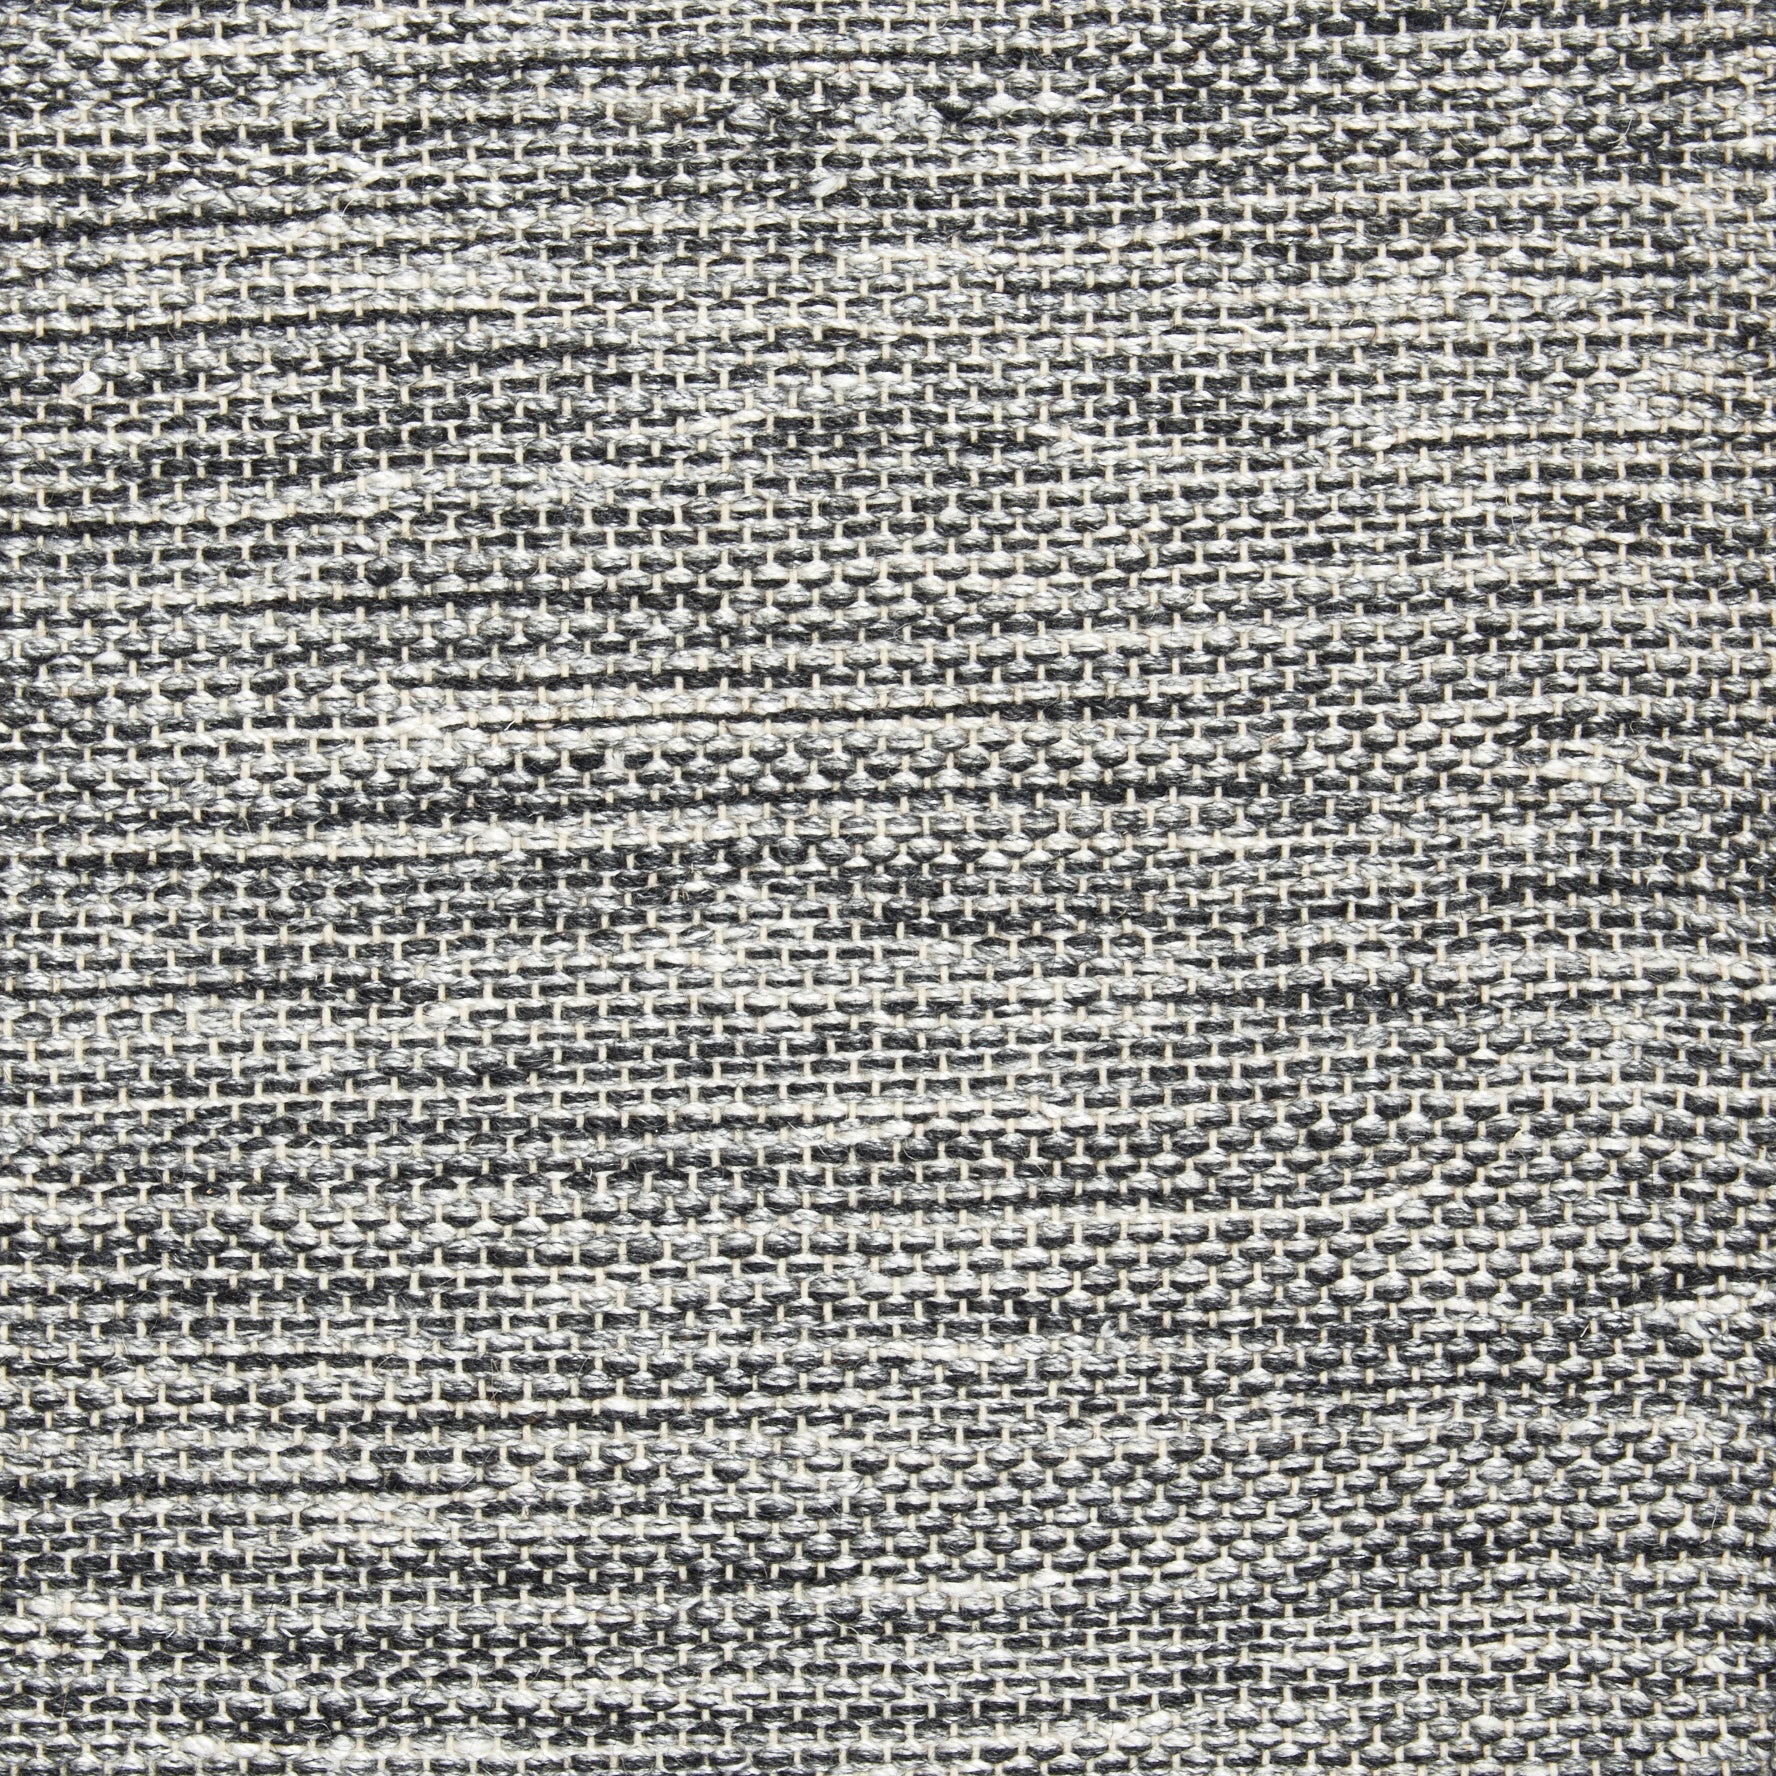 Wool-blend broadloom carpet swatch in a chunky weave texture in mottled charcoal and white.